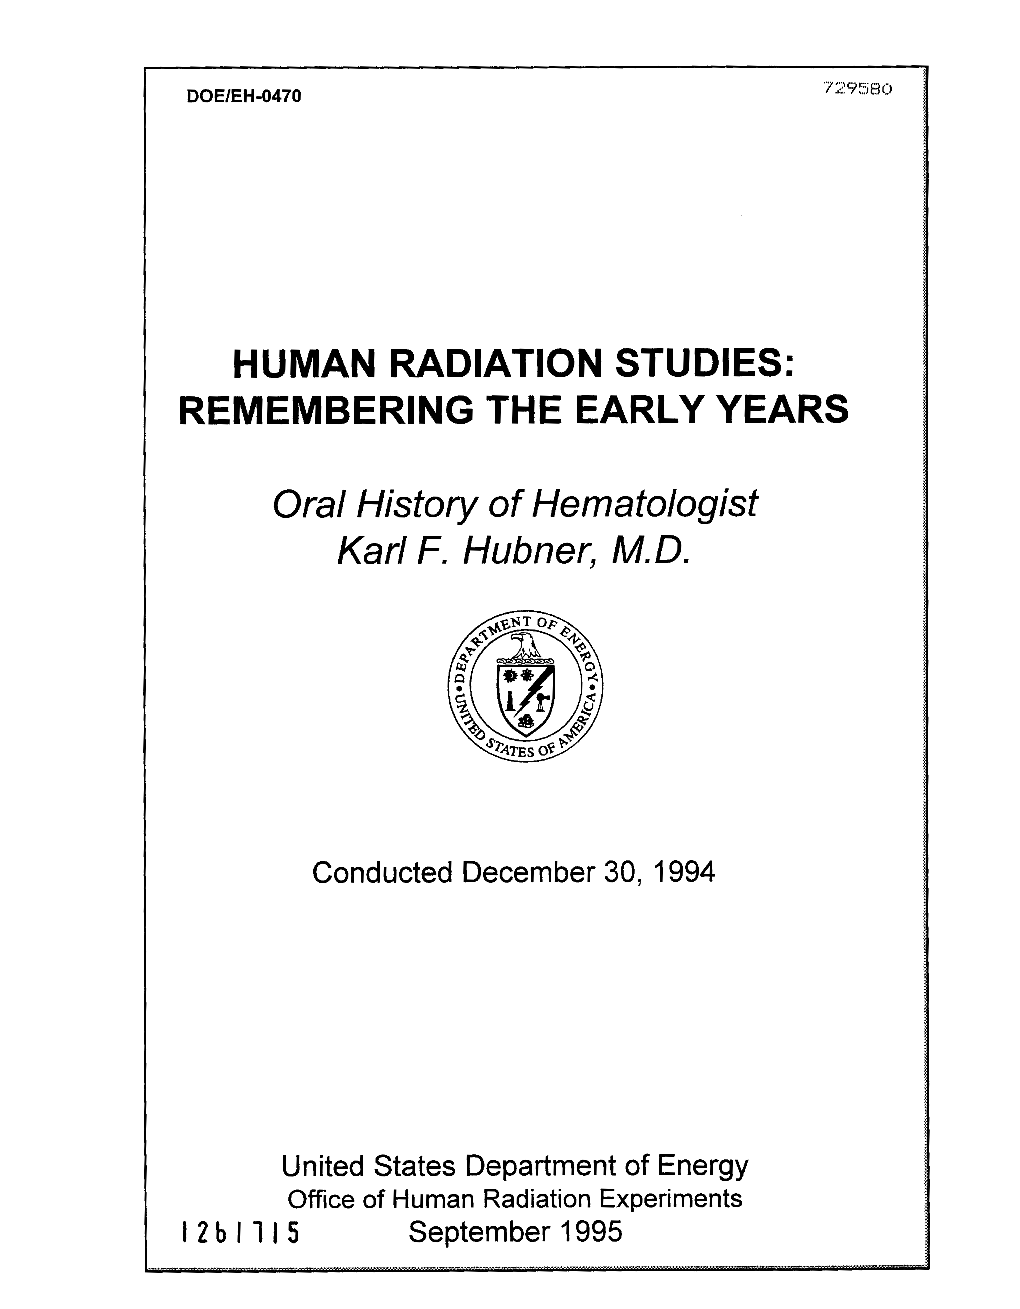 Human Radiation Studies: Remembering the Early Years. Oral